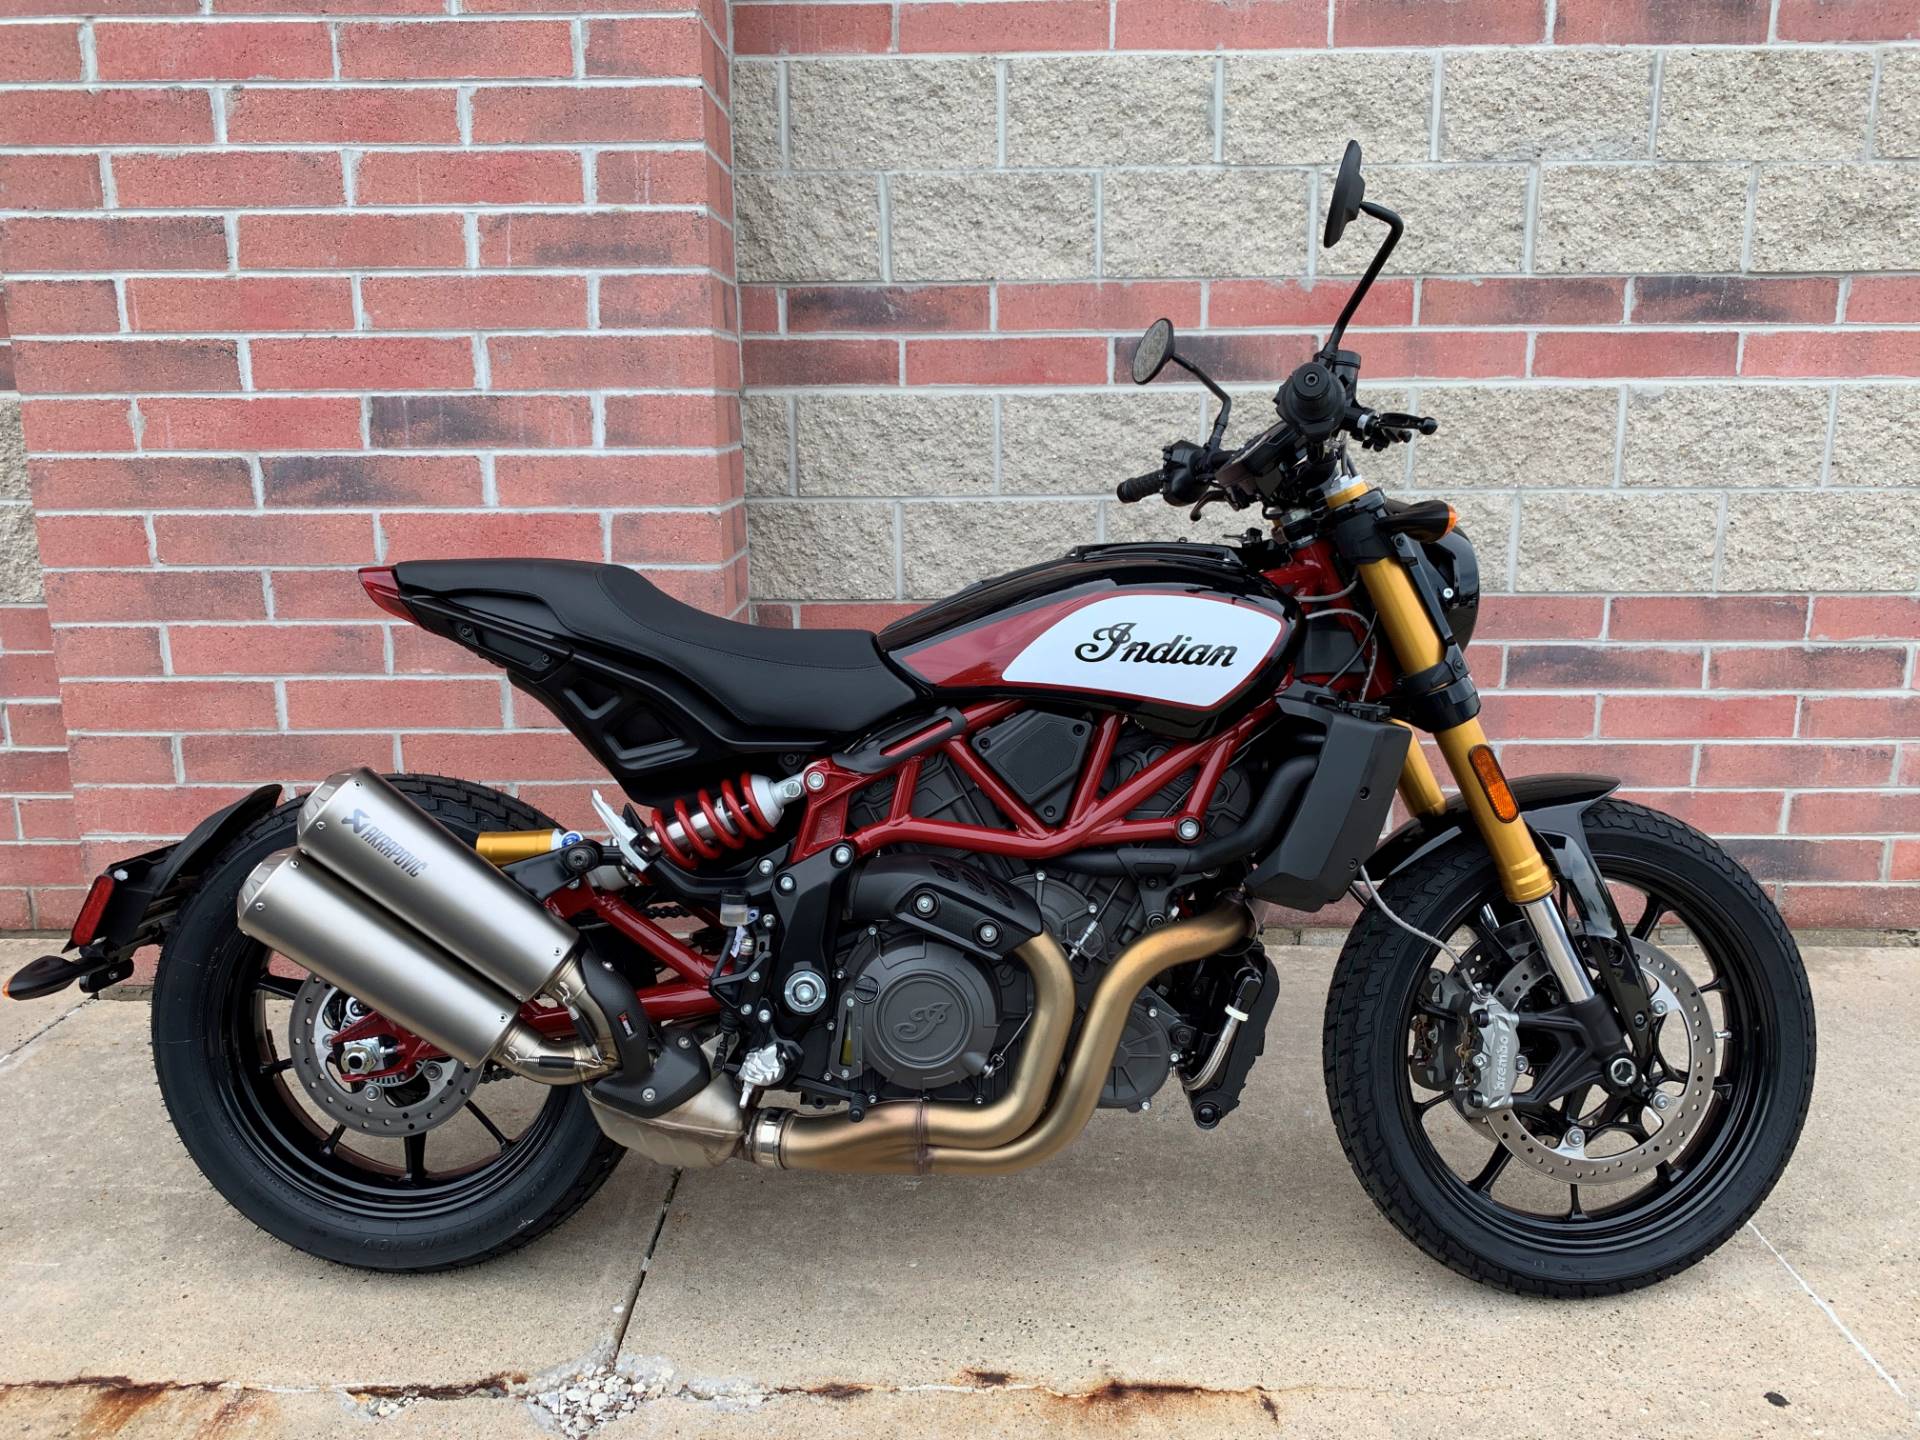 New 2019 Indian Ftr 1200 S Motorcycles In Muskego Wi Stock Number Ind153506